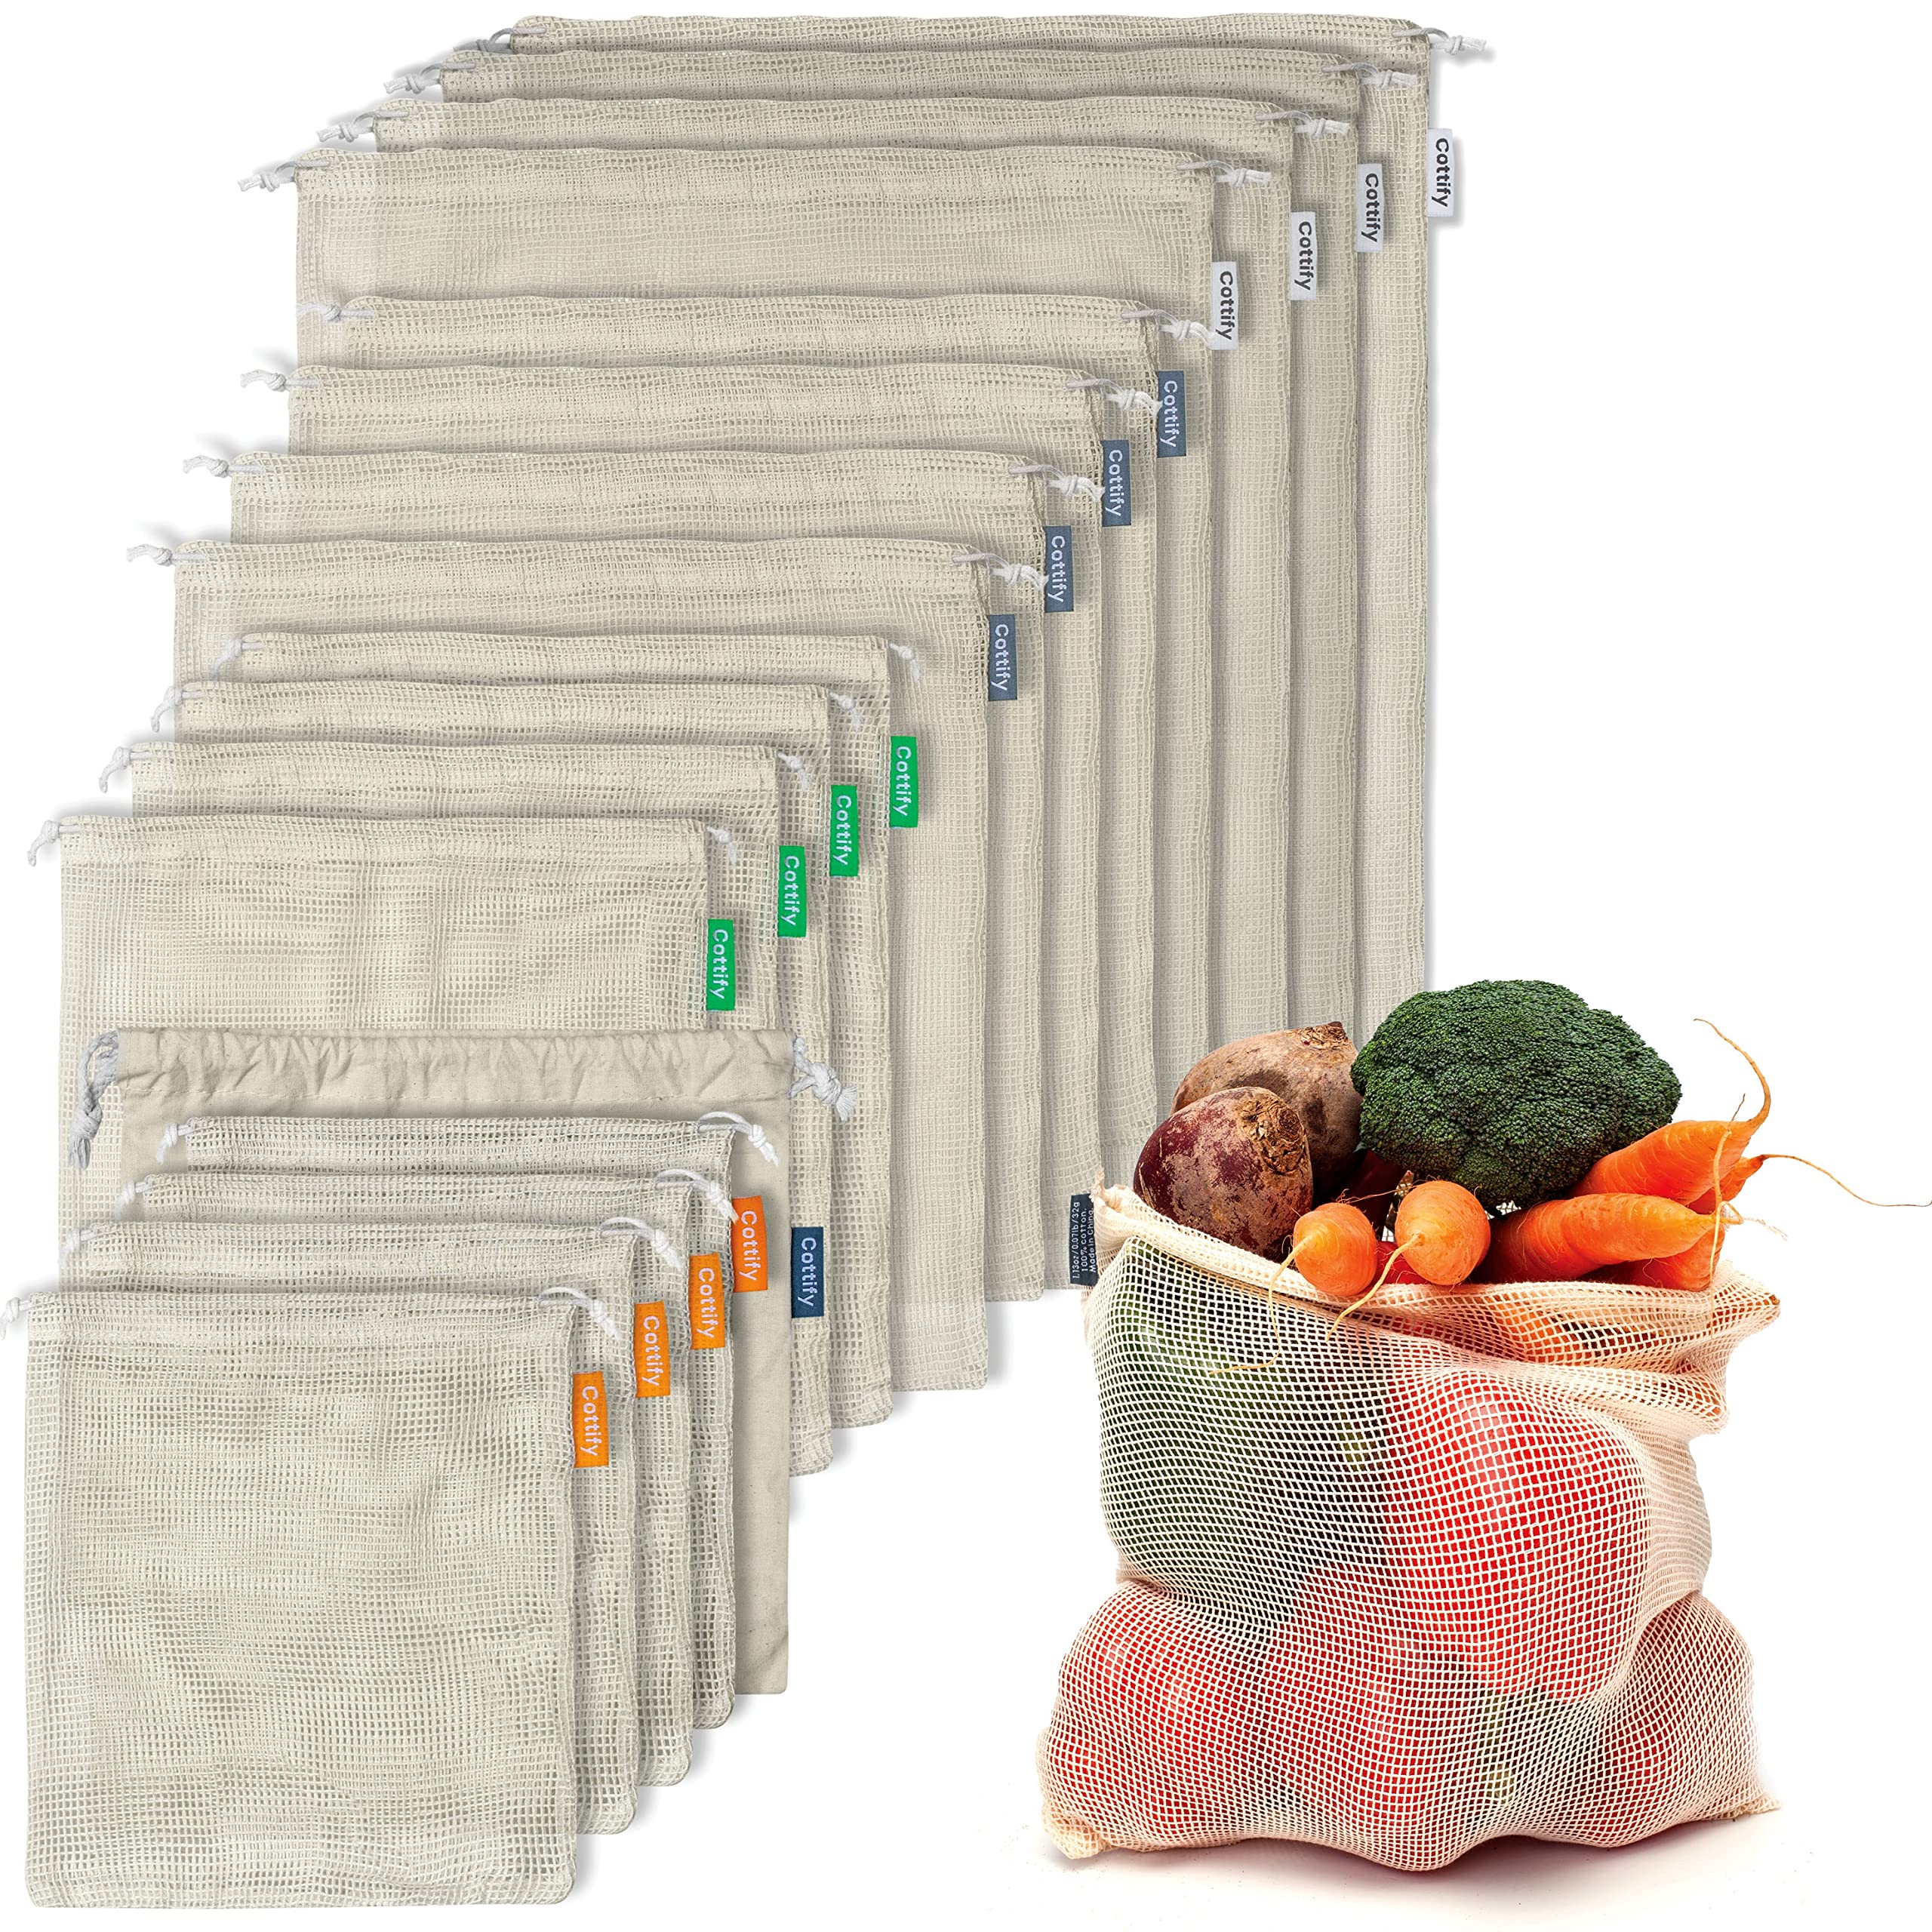 17 Reusable Cotton Mesh Produce Bags - 100% Organic Cotton, Durable, Double Stitched, Washable with Tare Weight & Drawstring - Mesh Bags for Grocery Shopping, Vegetables & Fruits, produce bgs 4 sizes